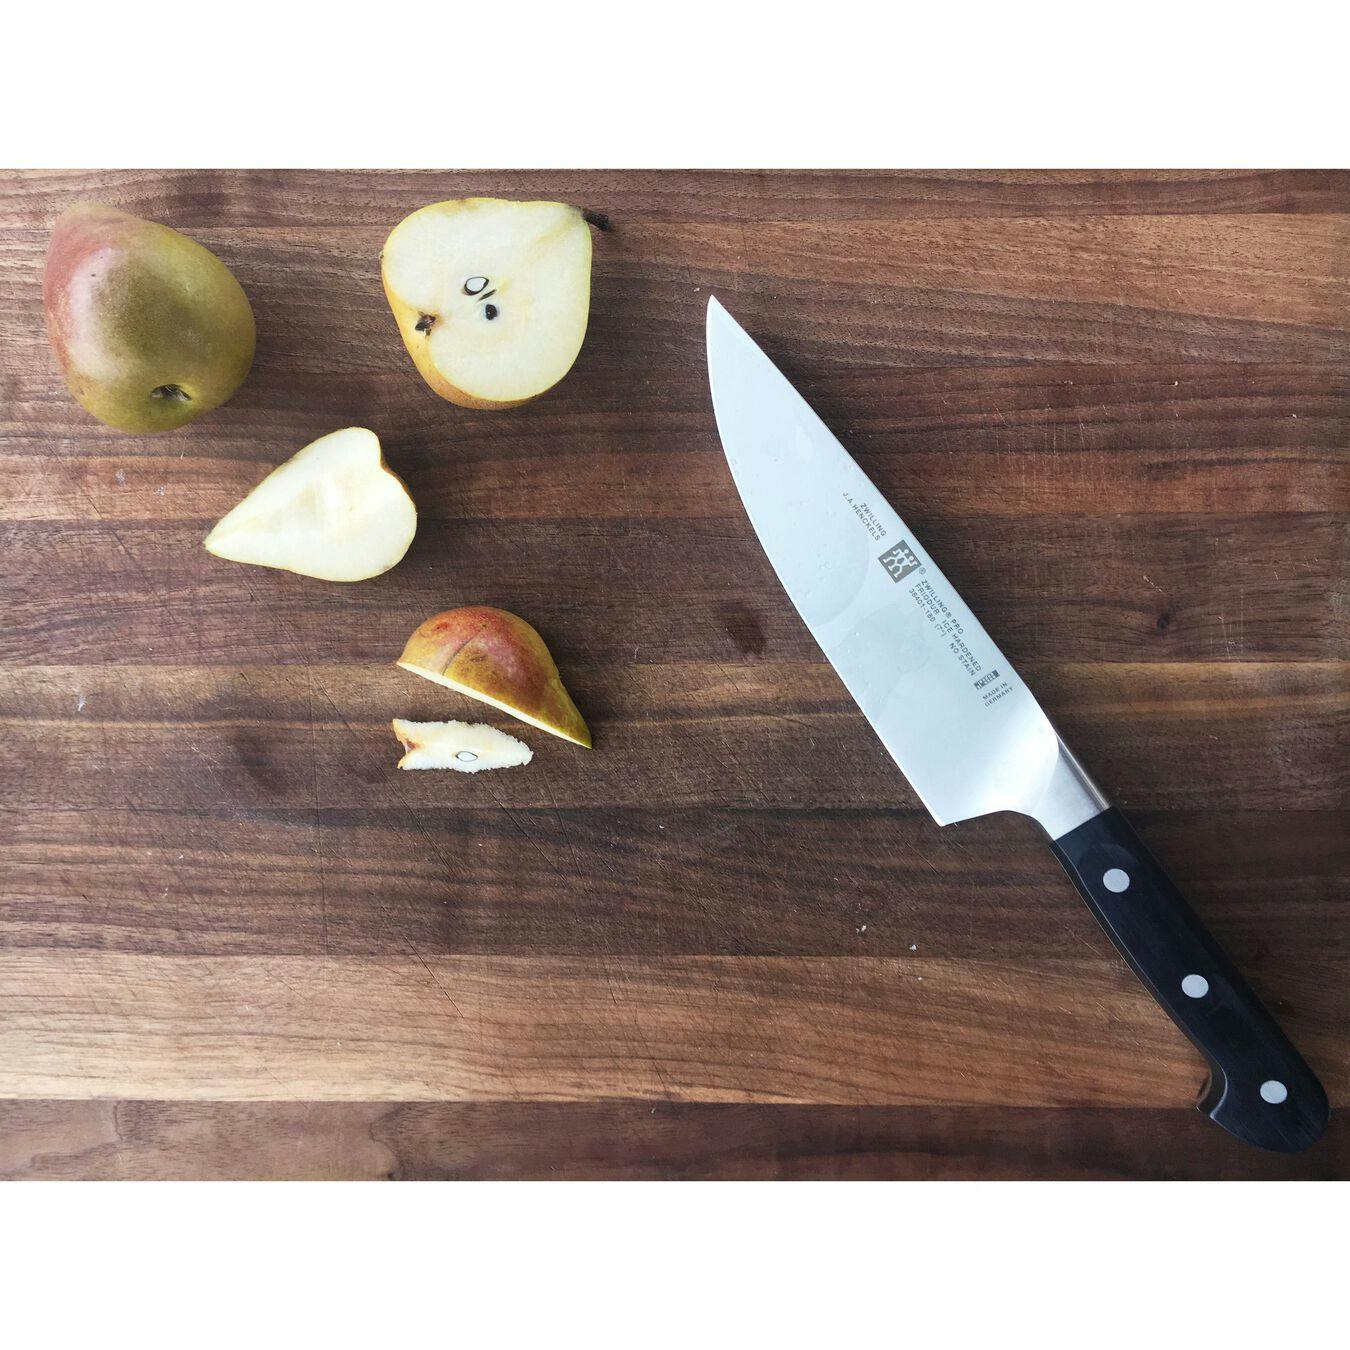 Zwilling Pro Chef's Knife, 8"